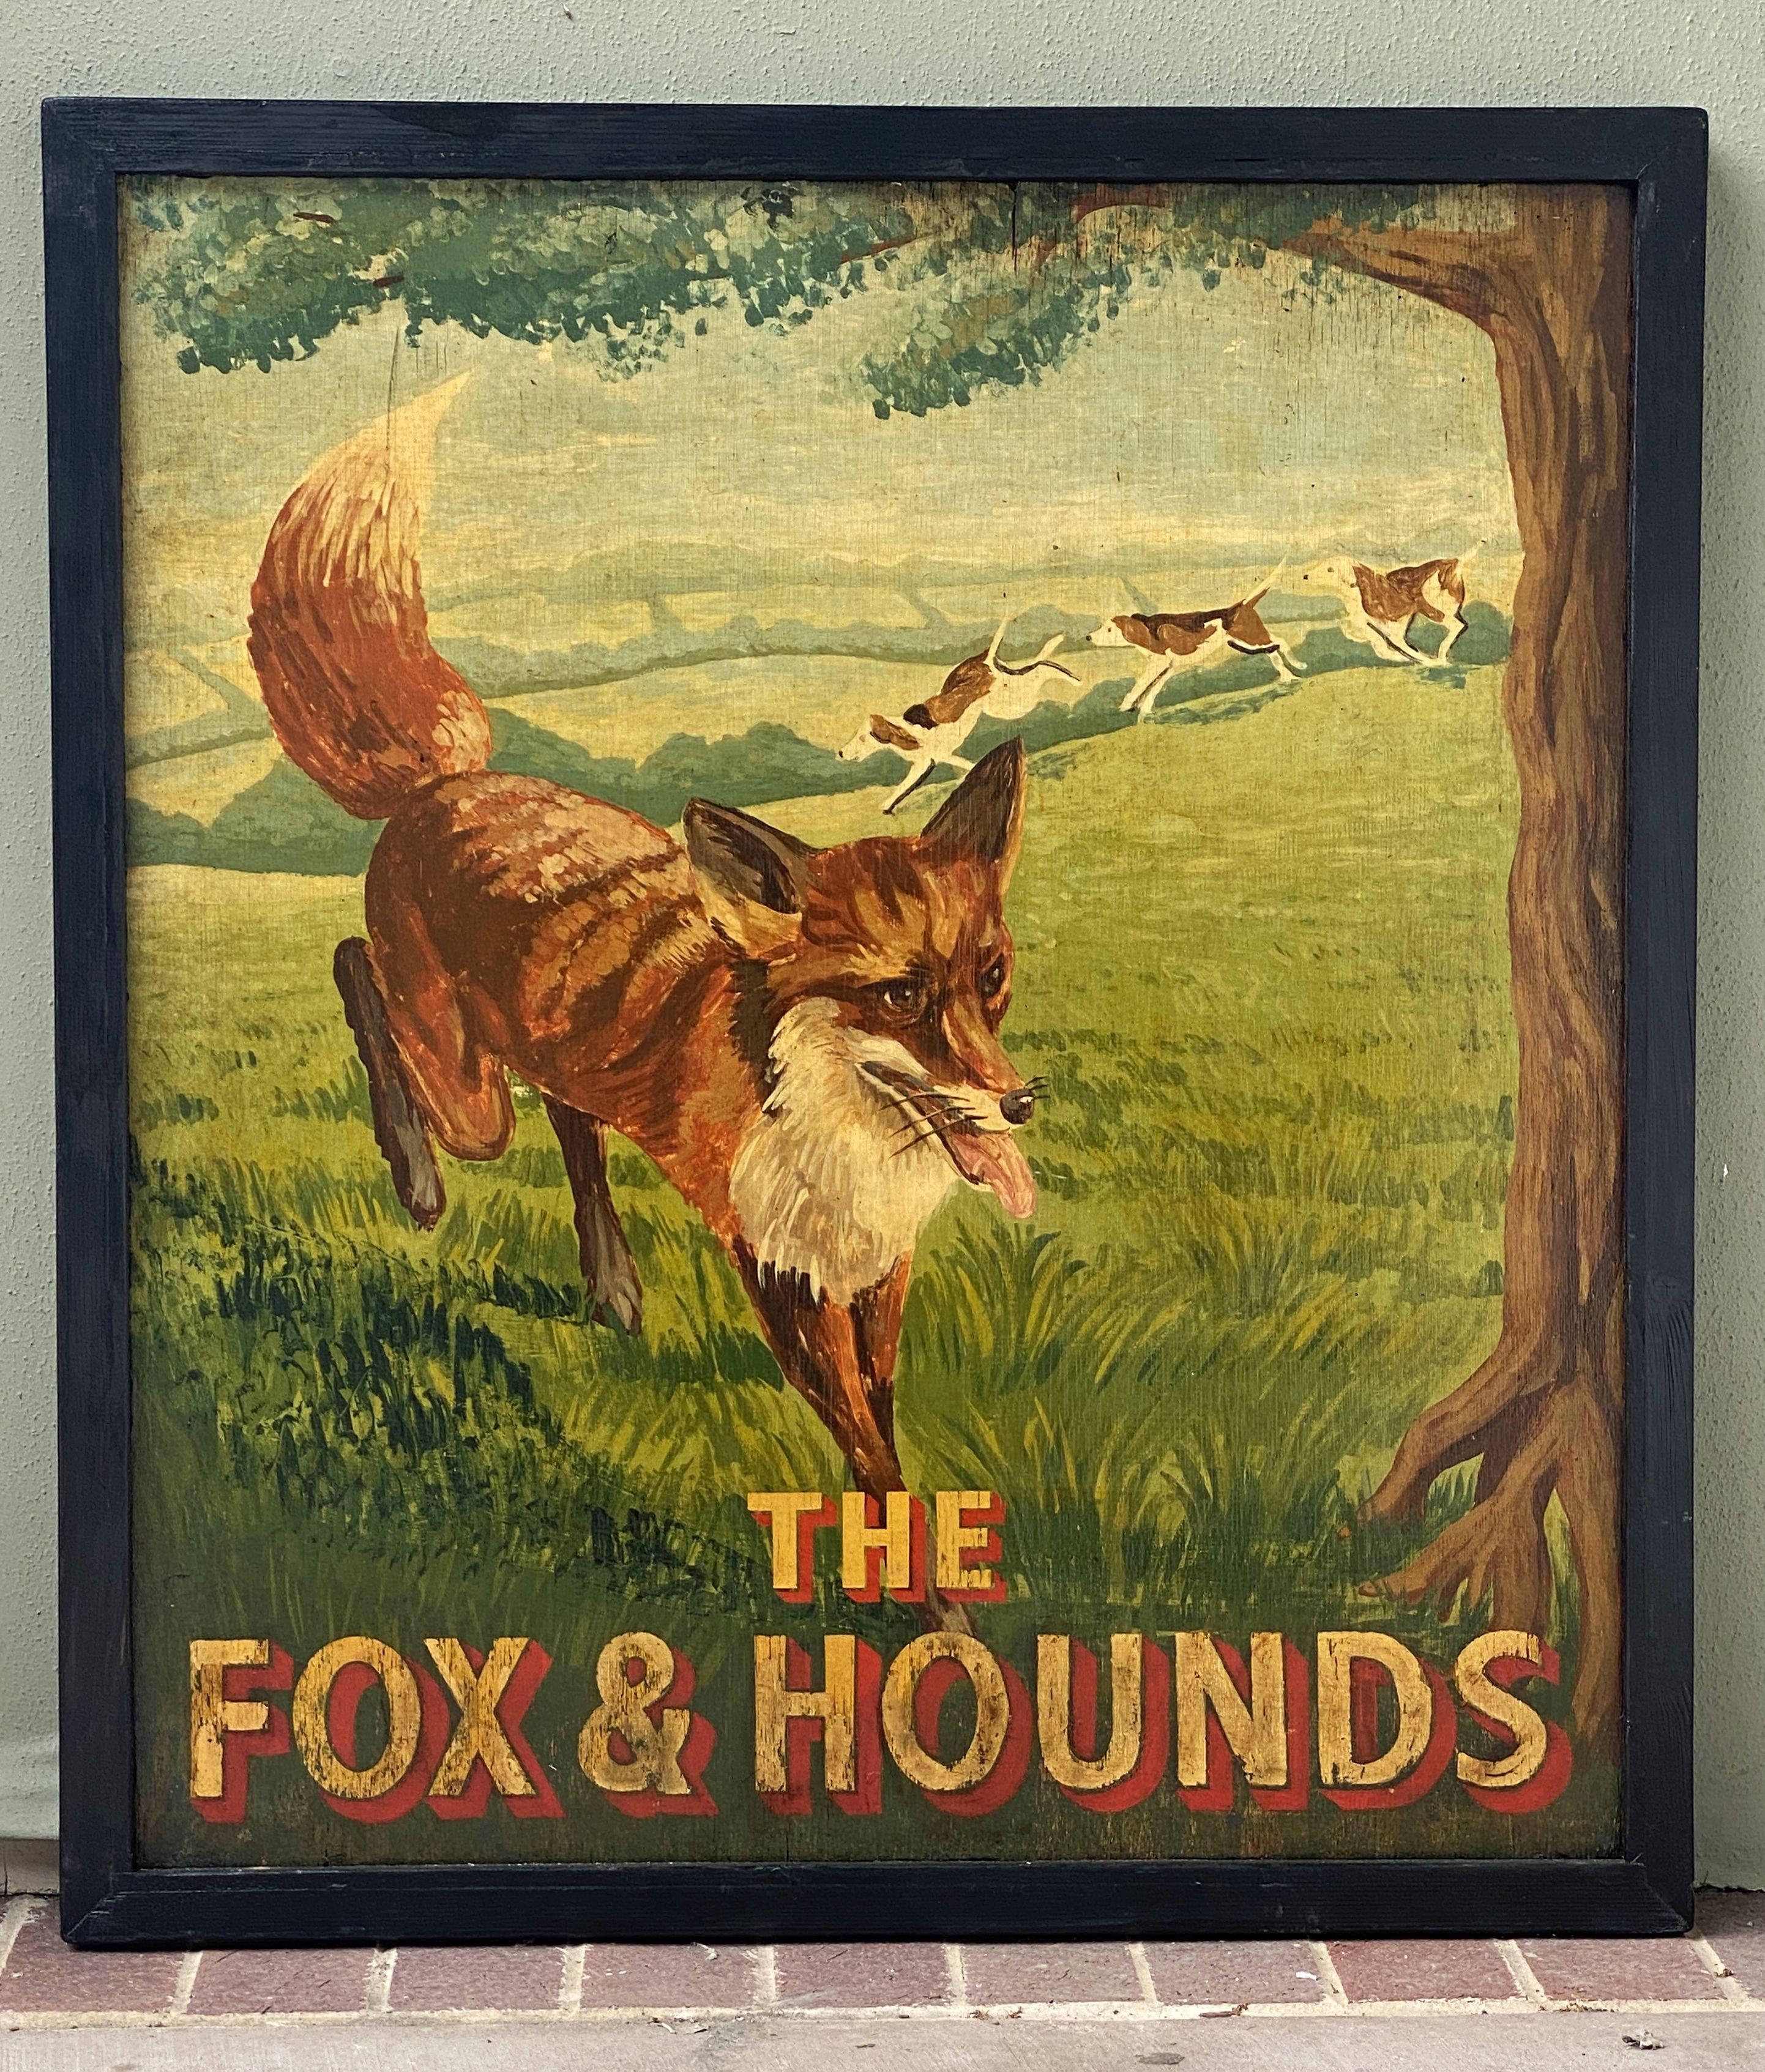 An authentic English pub sign (one-sided) featuring a painting of a fox being chased by three hounds entitled: The Fox & Hounds

A very fine example of vintage advertising artwork and ready for display.